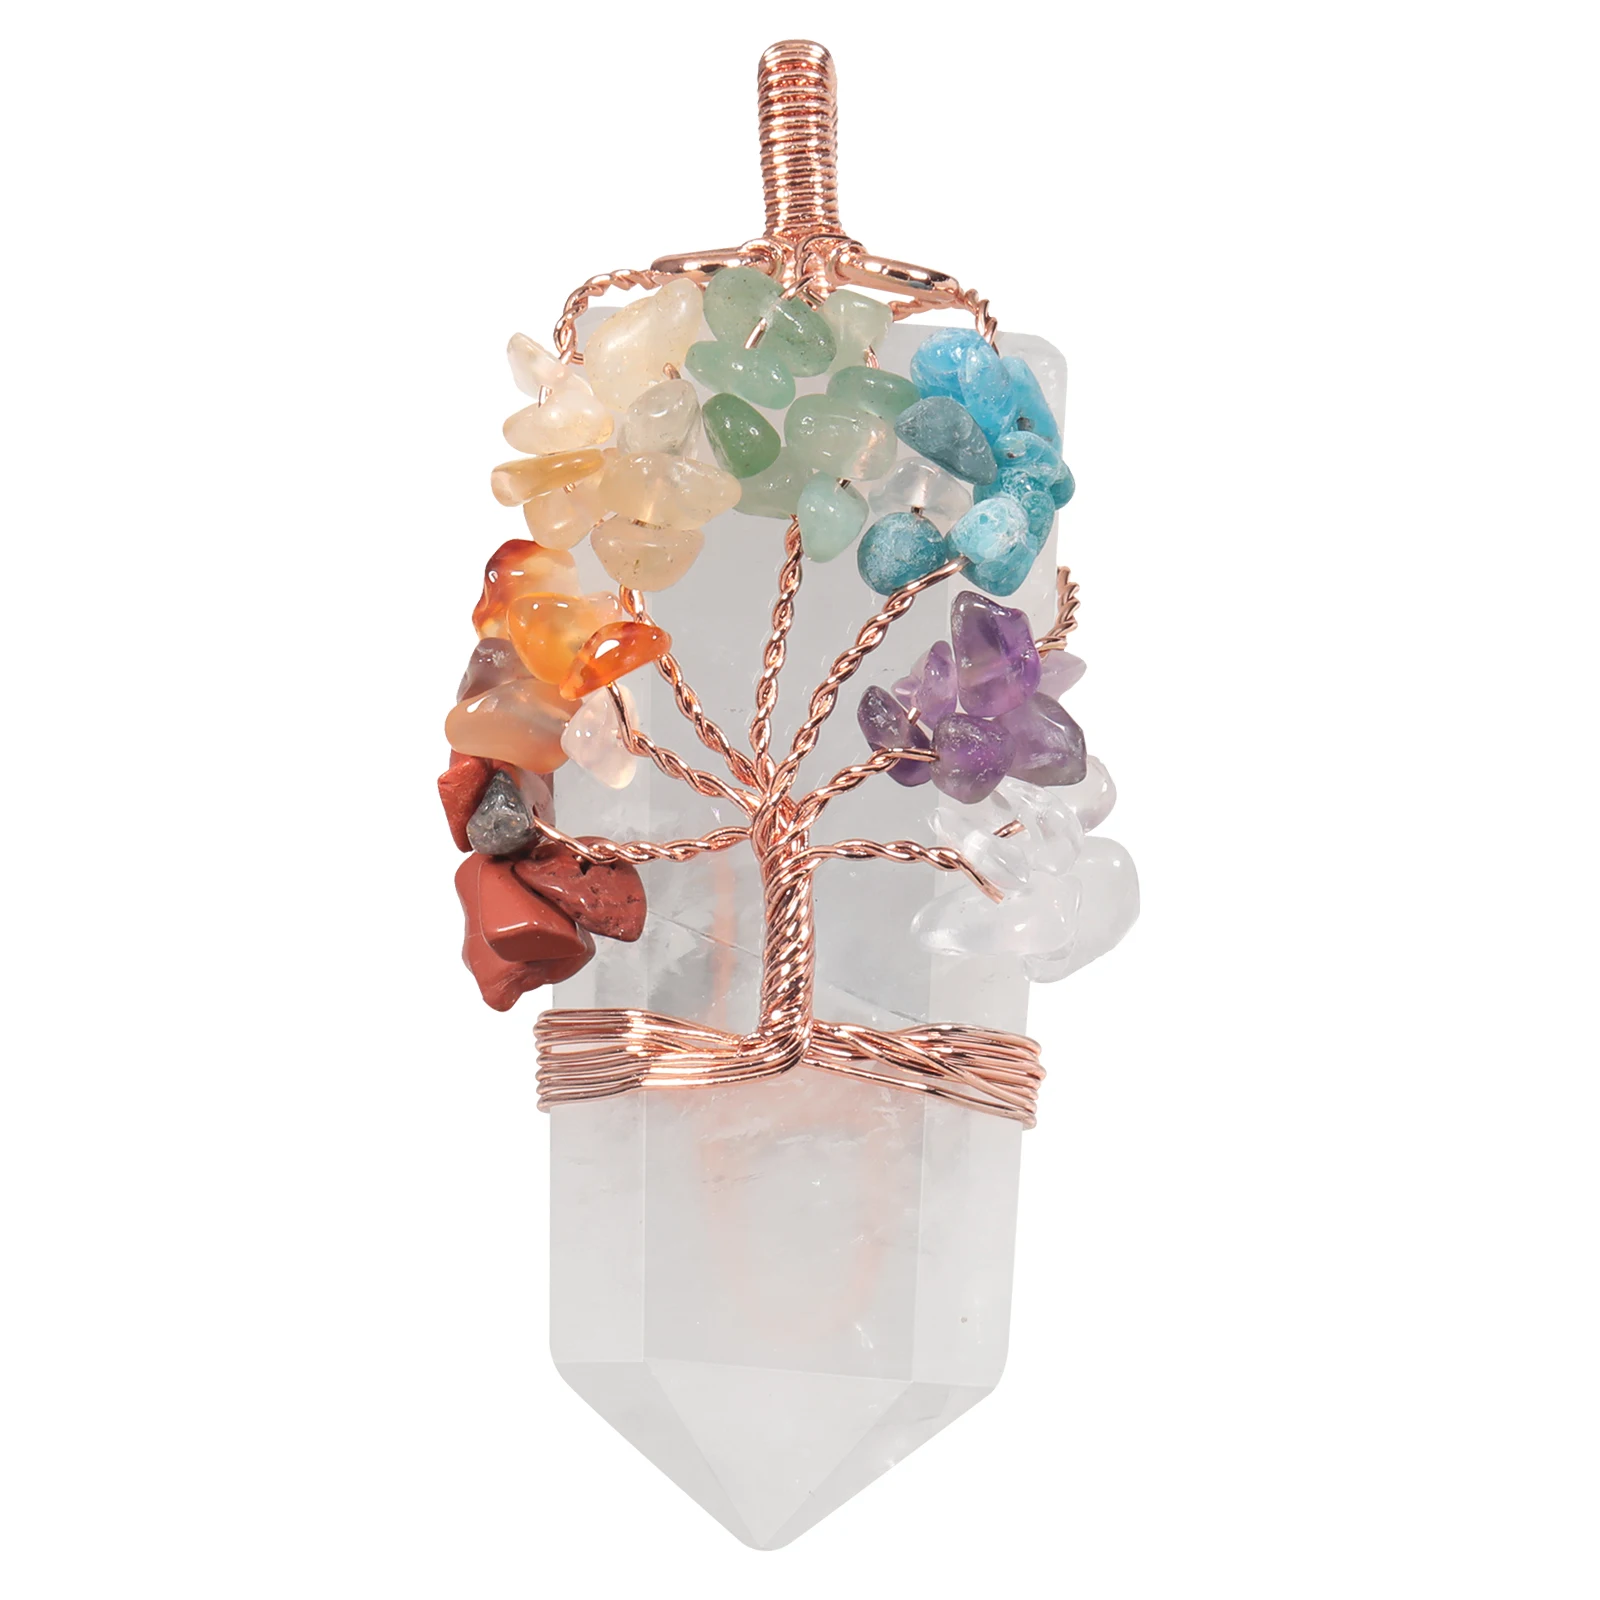 

Natural Healing Rock Quartz Faceted Crystal Hexagons Pendant Handmade Wrapped Bronze Wire Rubble 7 Chakras Tree Of Life Jewelry